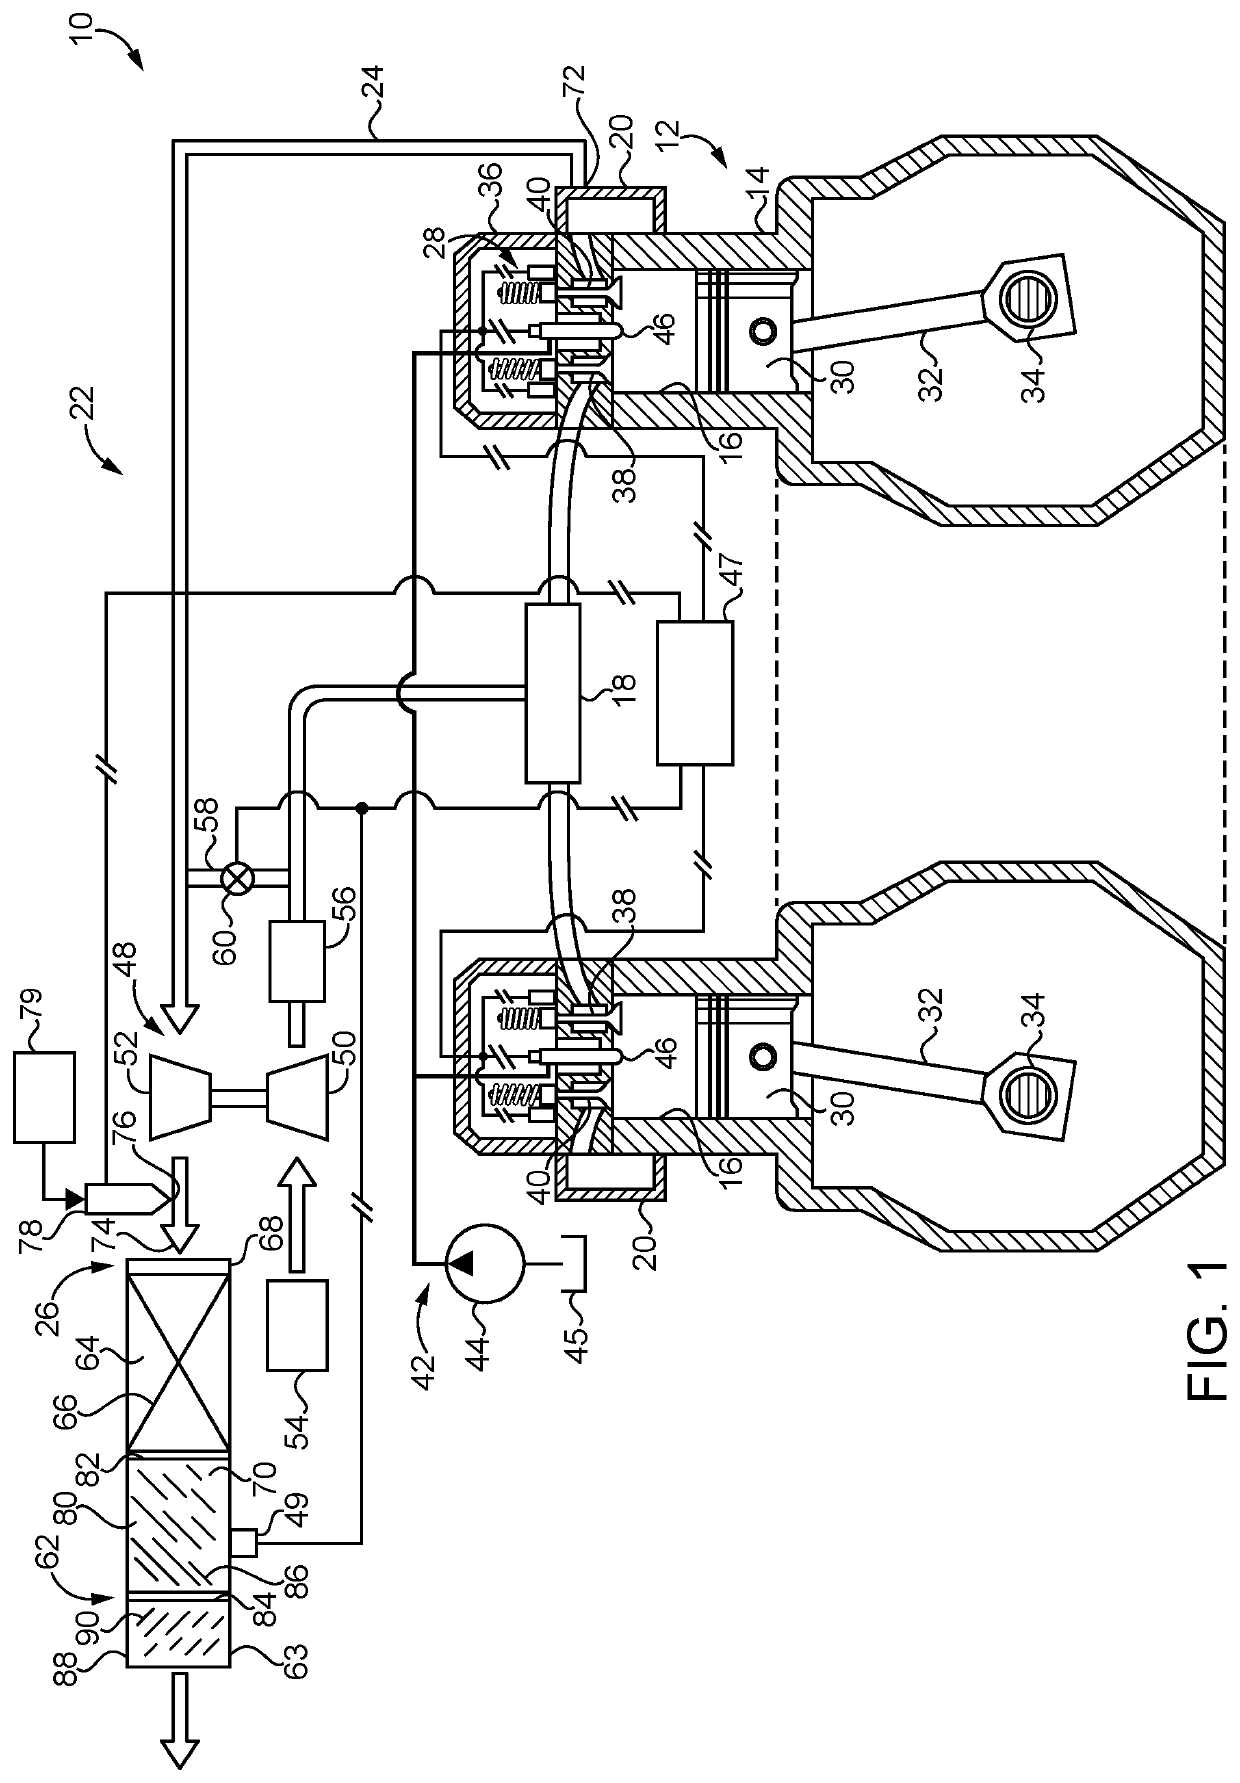 ENGINE SYSTEM AND OPERATING STRATEGY FOR SELECTIVE IN SITU AND EX SITU LIMITING OF NOx PRODUCTION